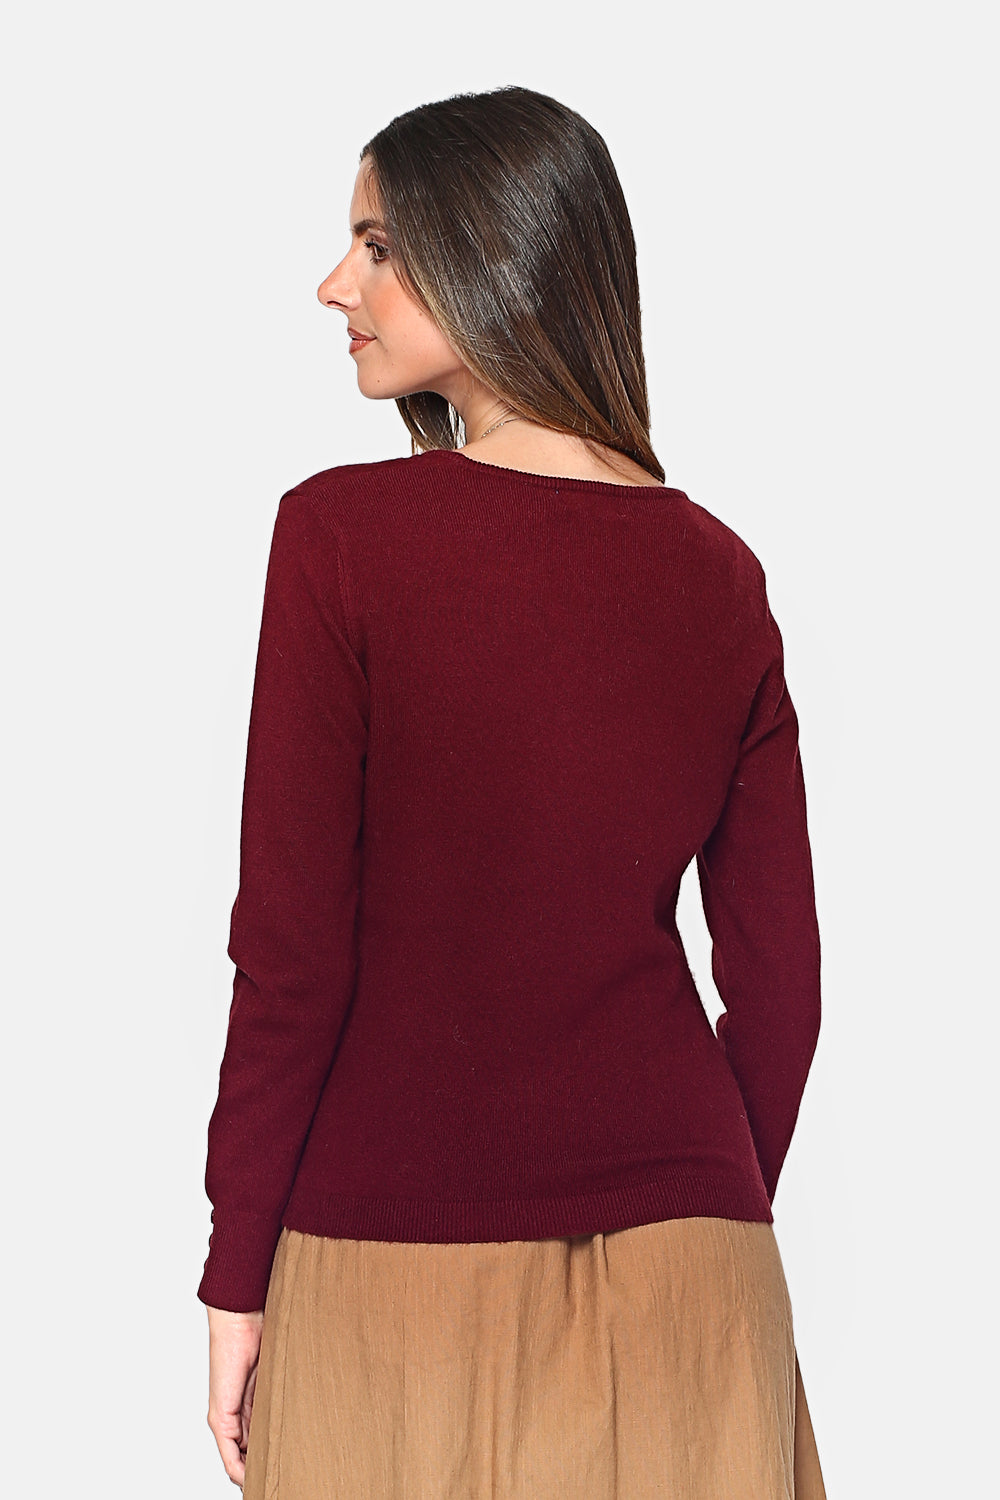 LOW V-NECK SWEATER WITH BUTTONS ON COLLAR